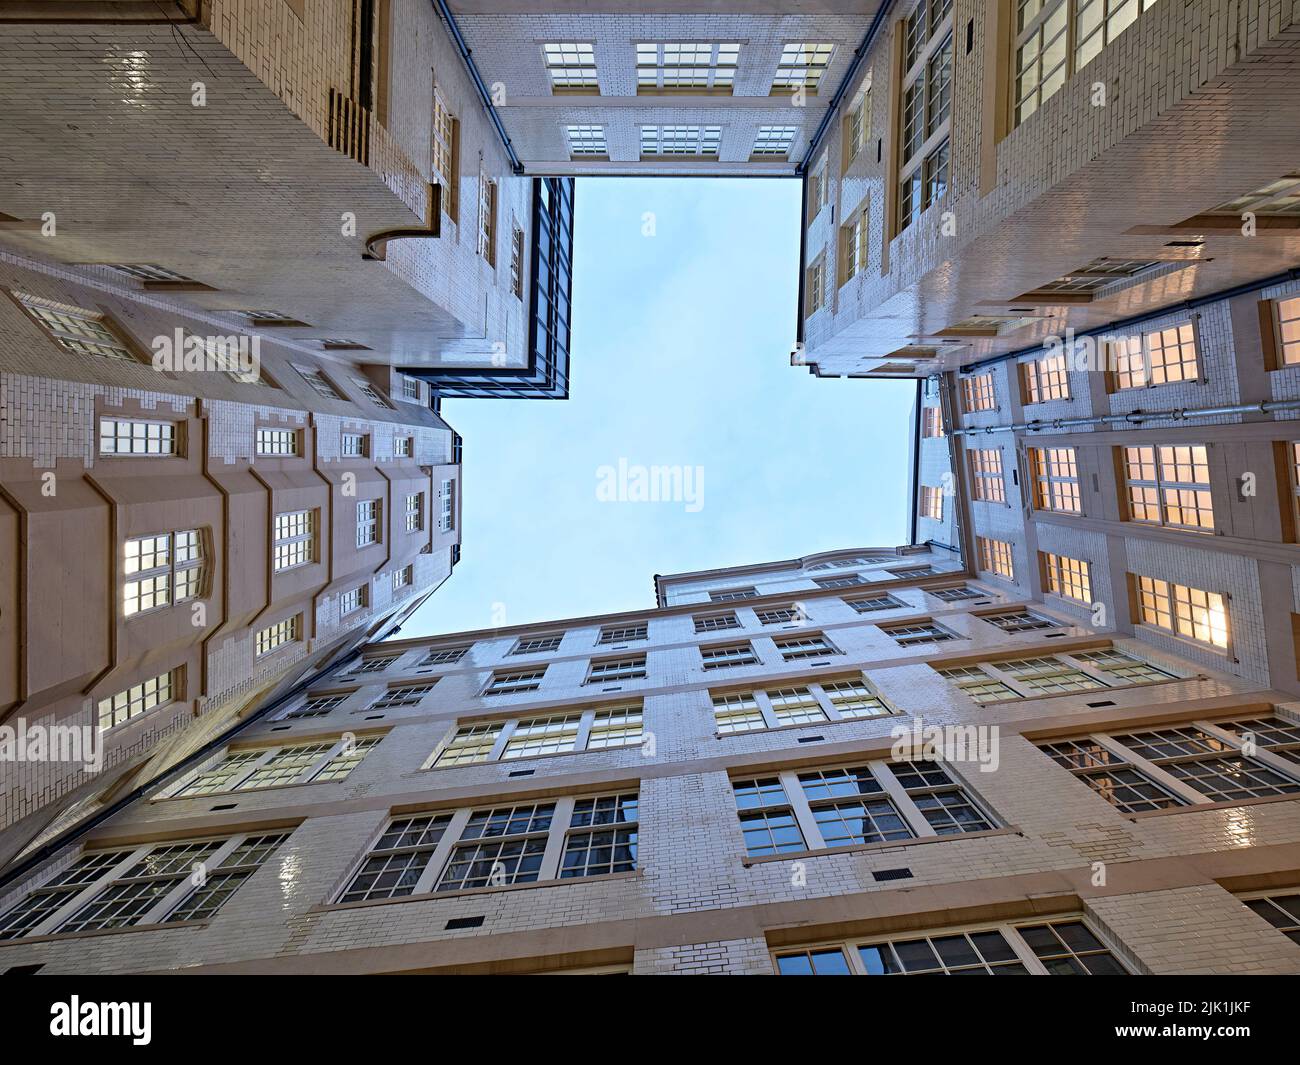 Extreme view upwards from open air courtyard with original facade. The Gilbert & One Lackington, London, United Kingdom. Architect: Stiff + Trevillion Stock Photo